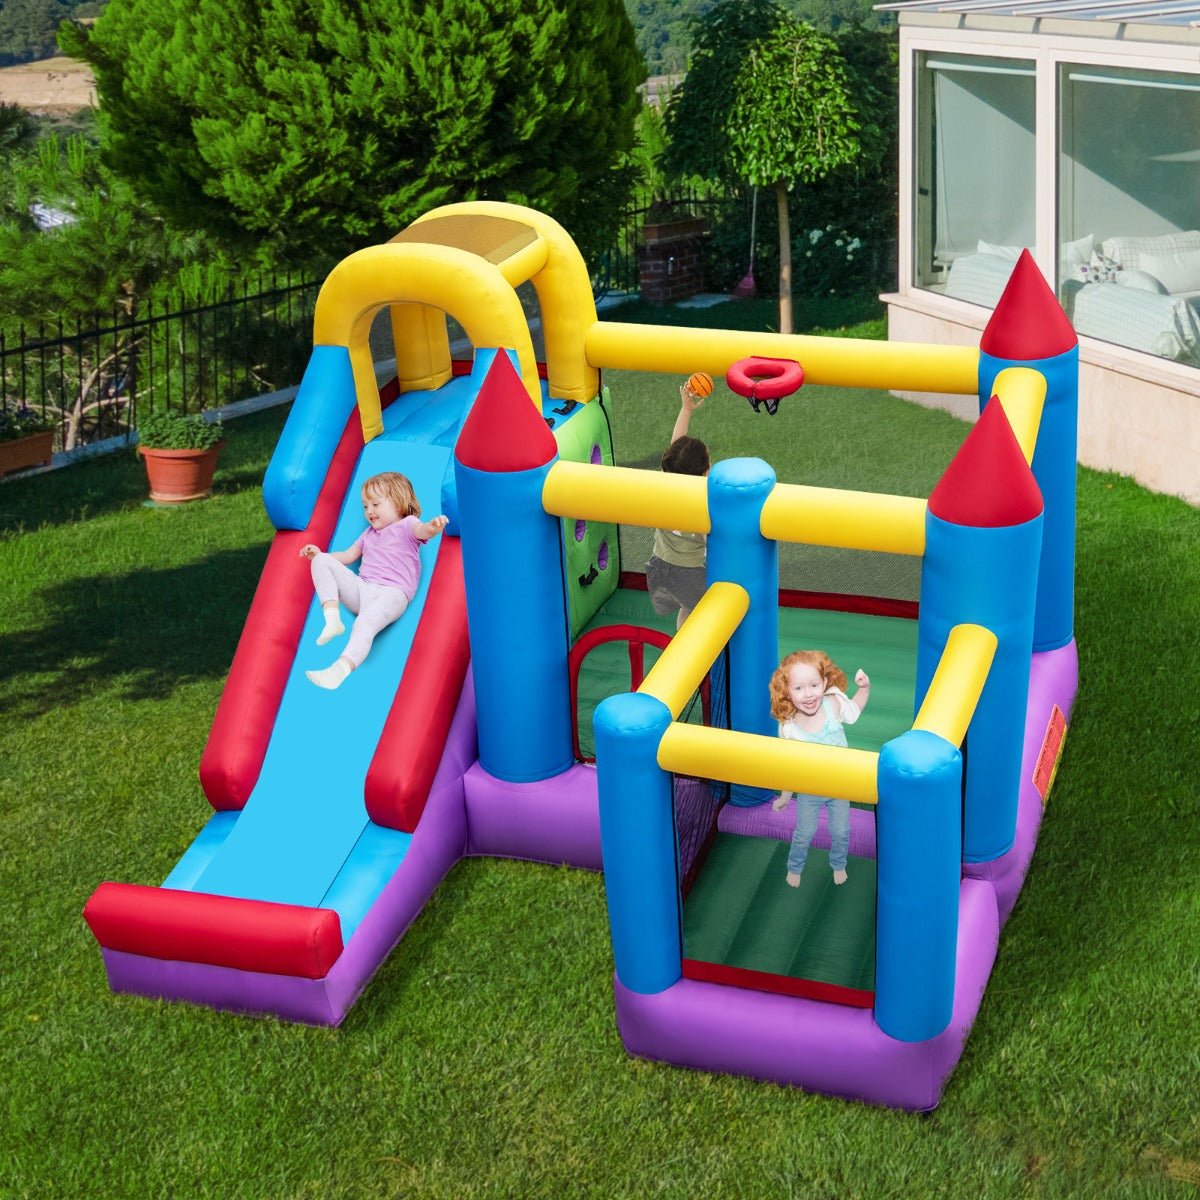 Inflatable Play Structure - Slide, Trampoline & Activity Center (Blower Not Included)